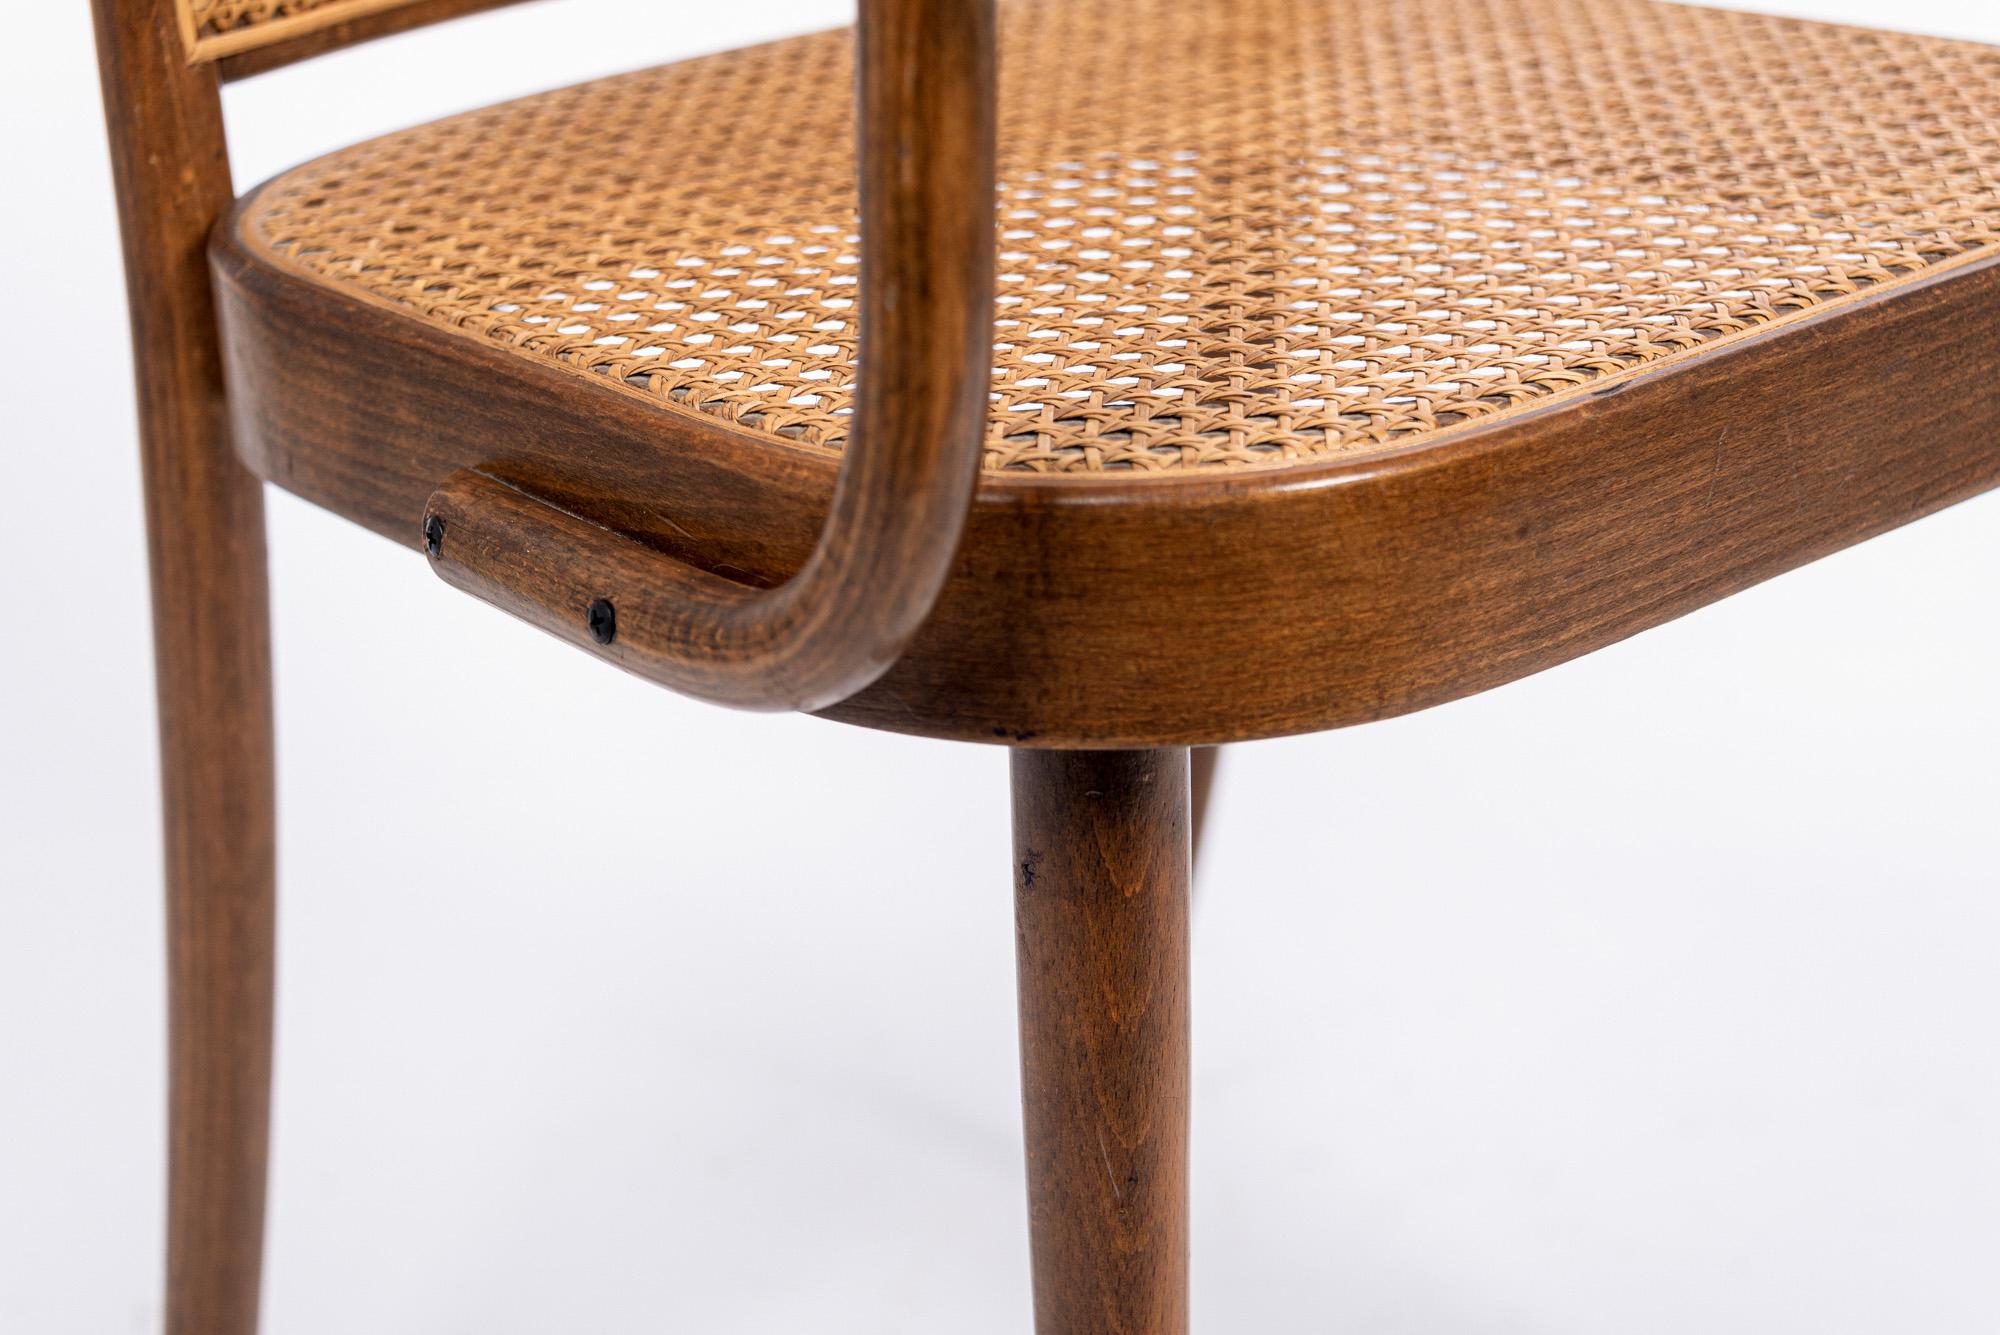 Midcentury Bentwood & Cane Cafe Chair by Joseph Hoffman for Stendig 1